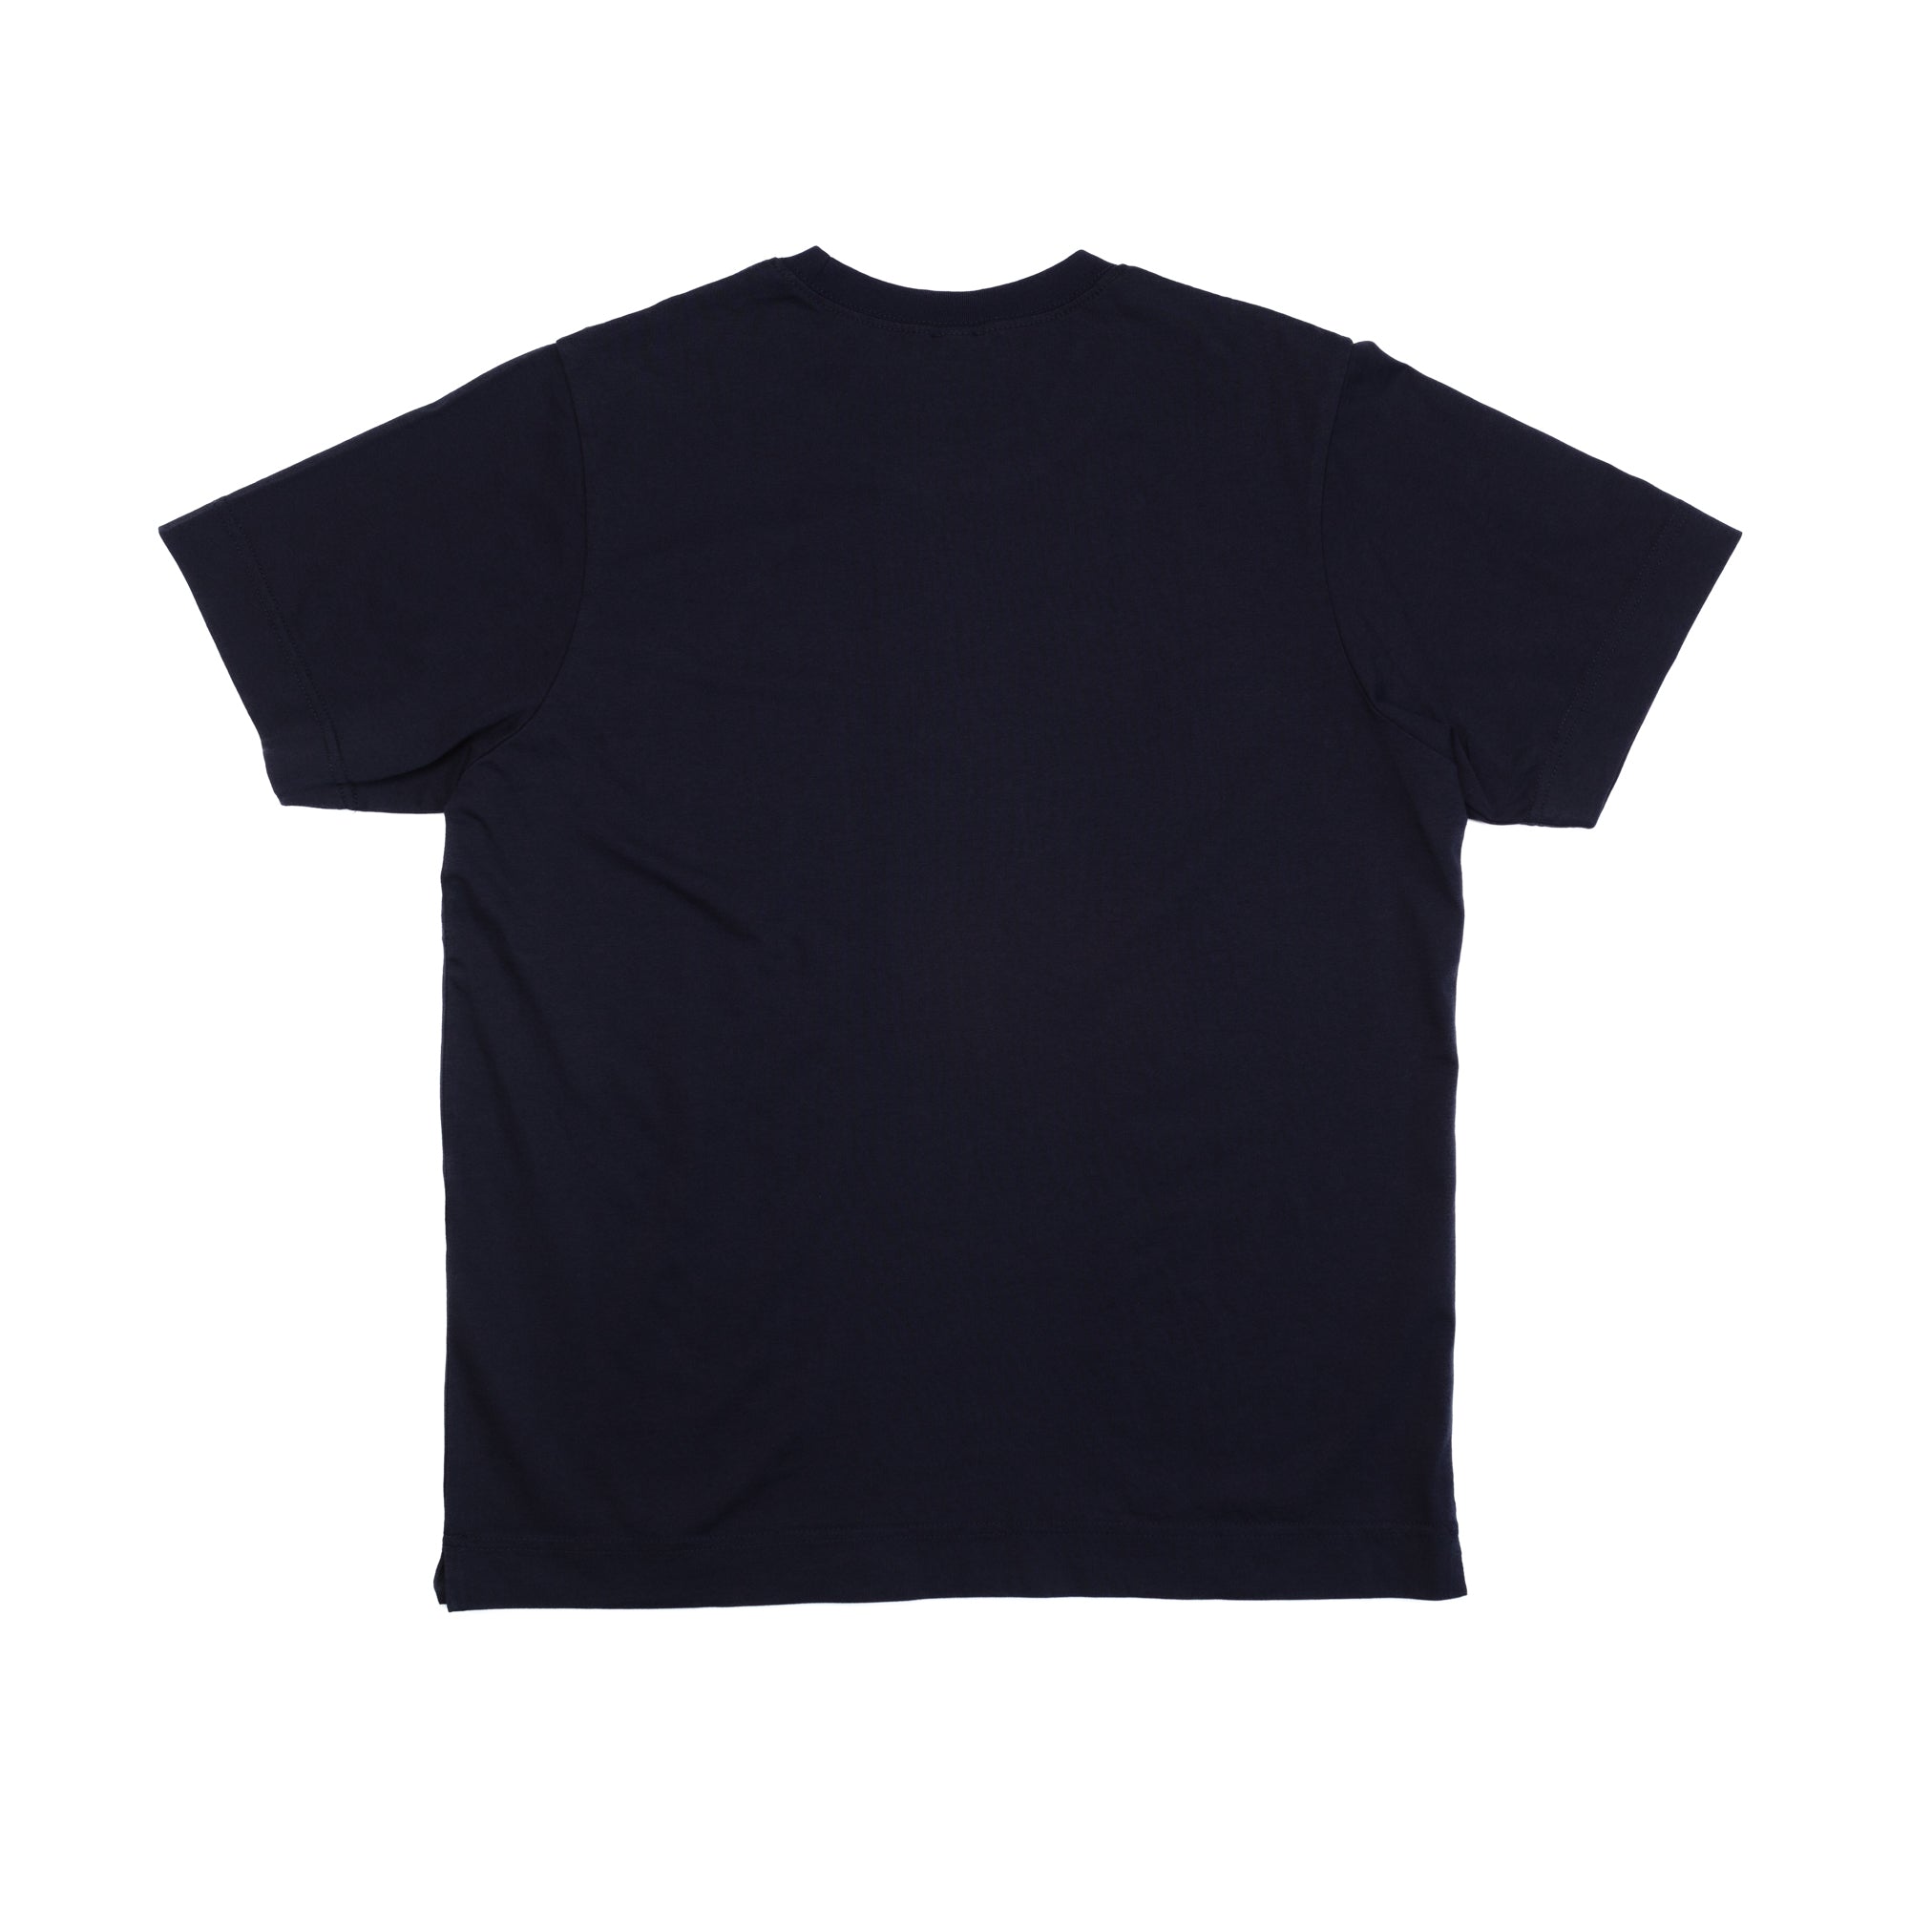 The Grant T-Shirt in Navy